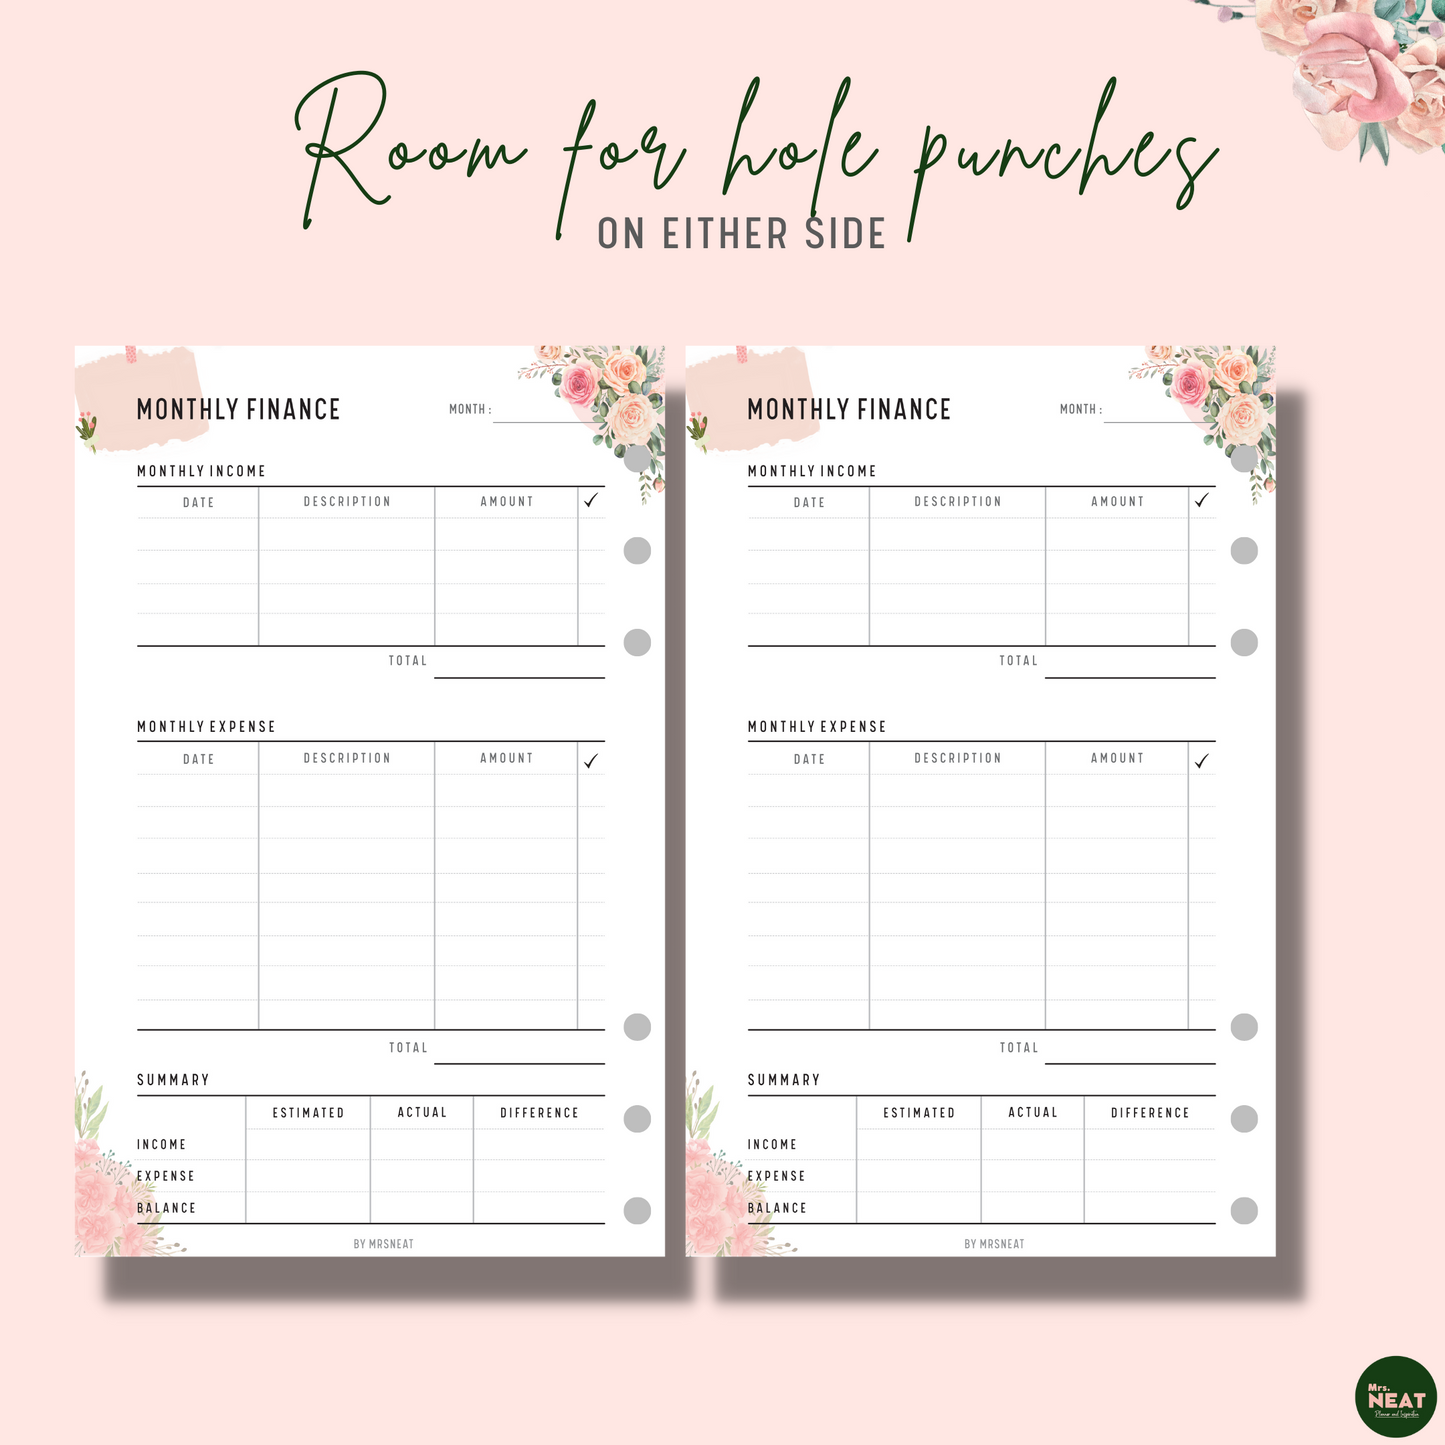 Pink Floral Monthly Finance Planner with room for hole punches on either side